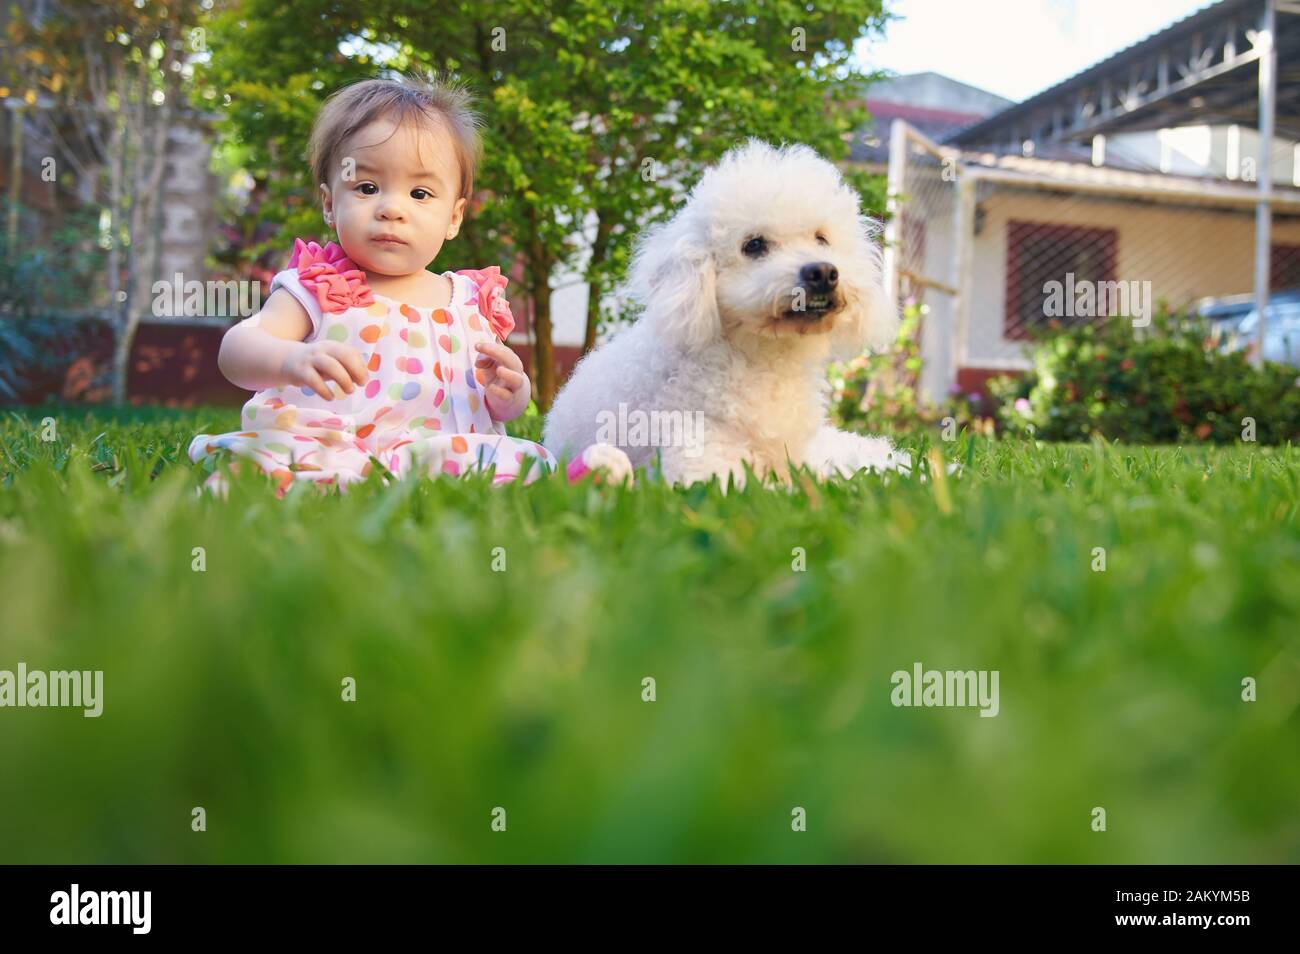 Baby Girl with white poodle dog sitting on Green grass meadow Banque D'Images